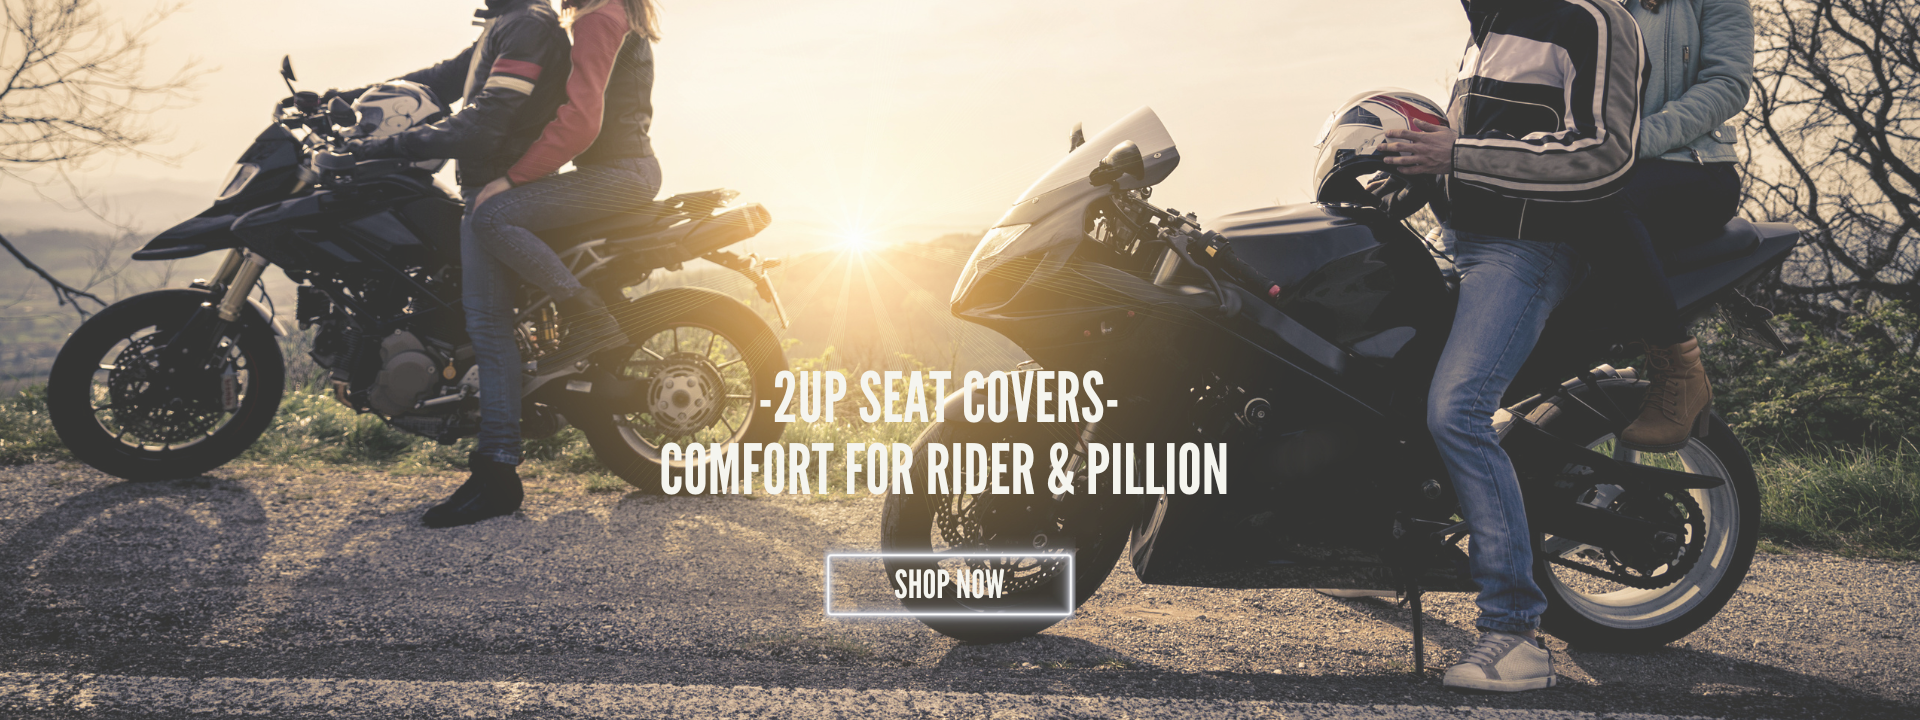 5 Motorcycle Seat Pads Compared